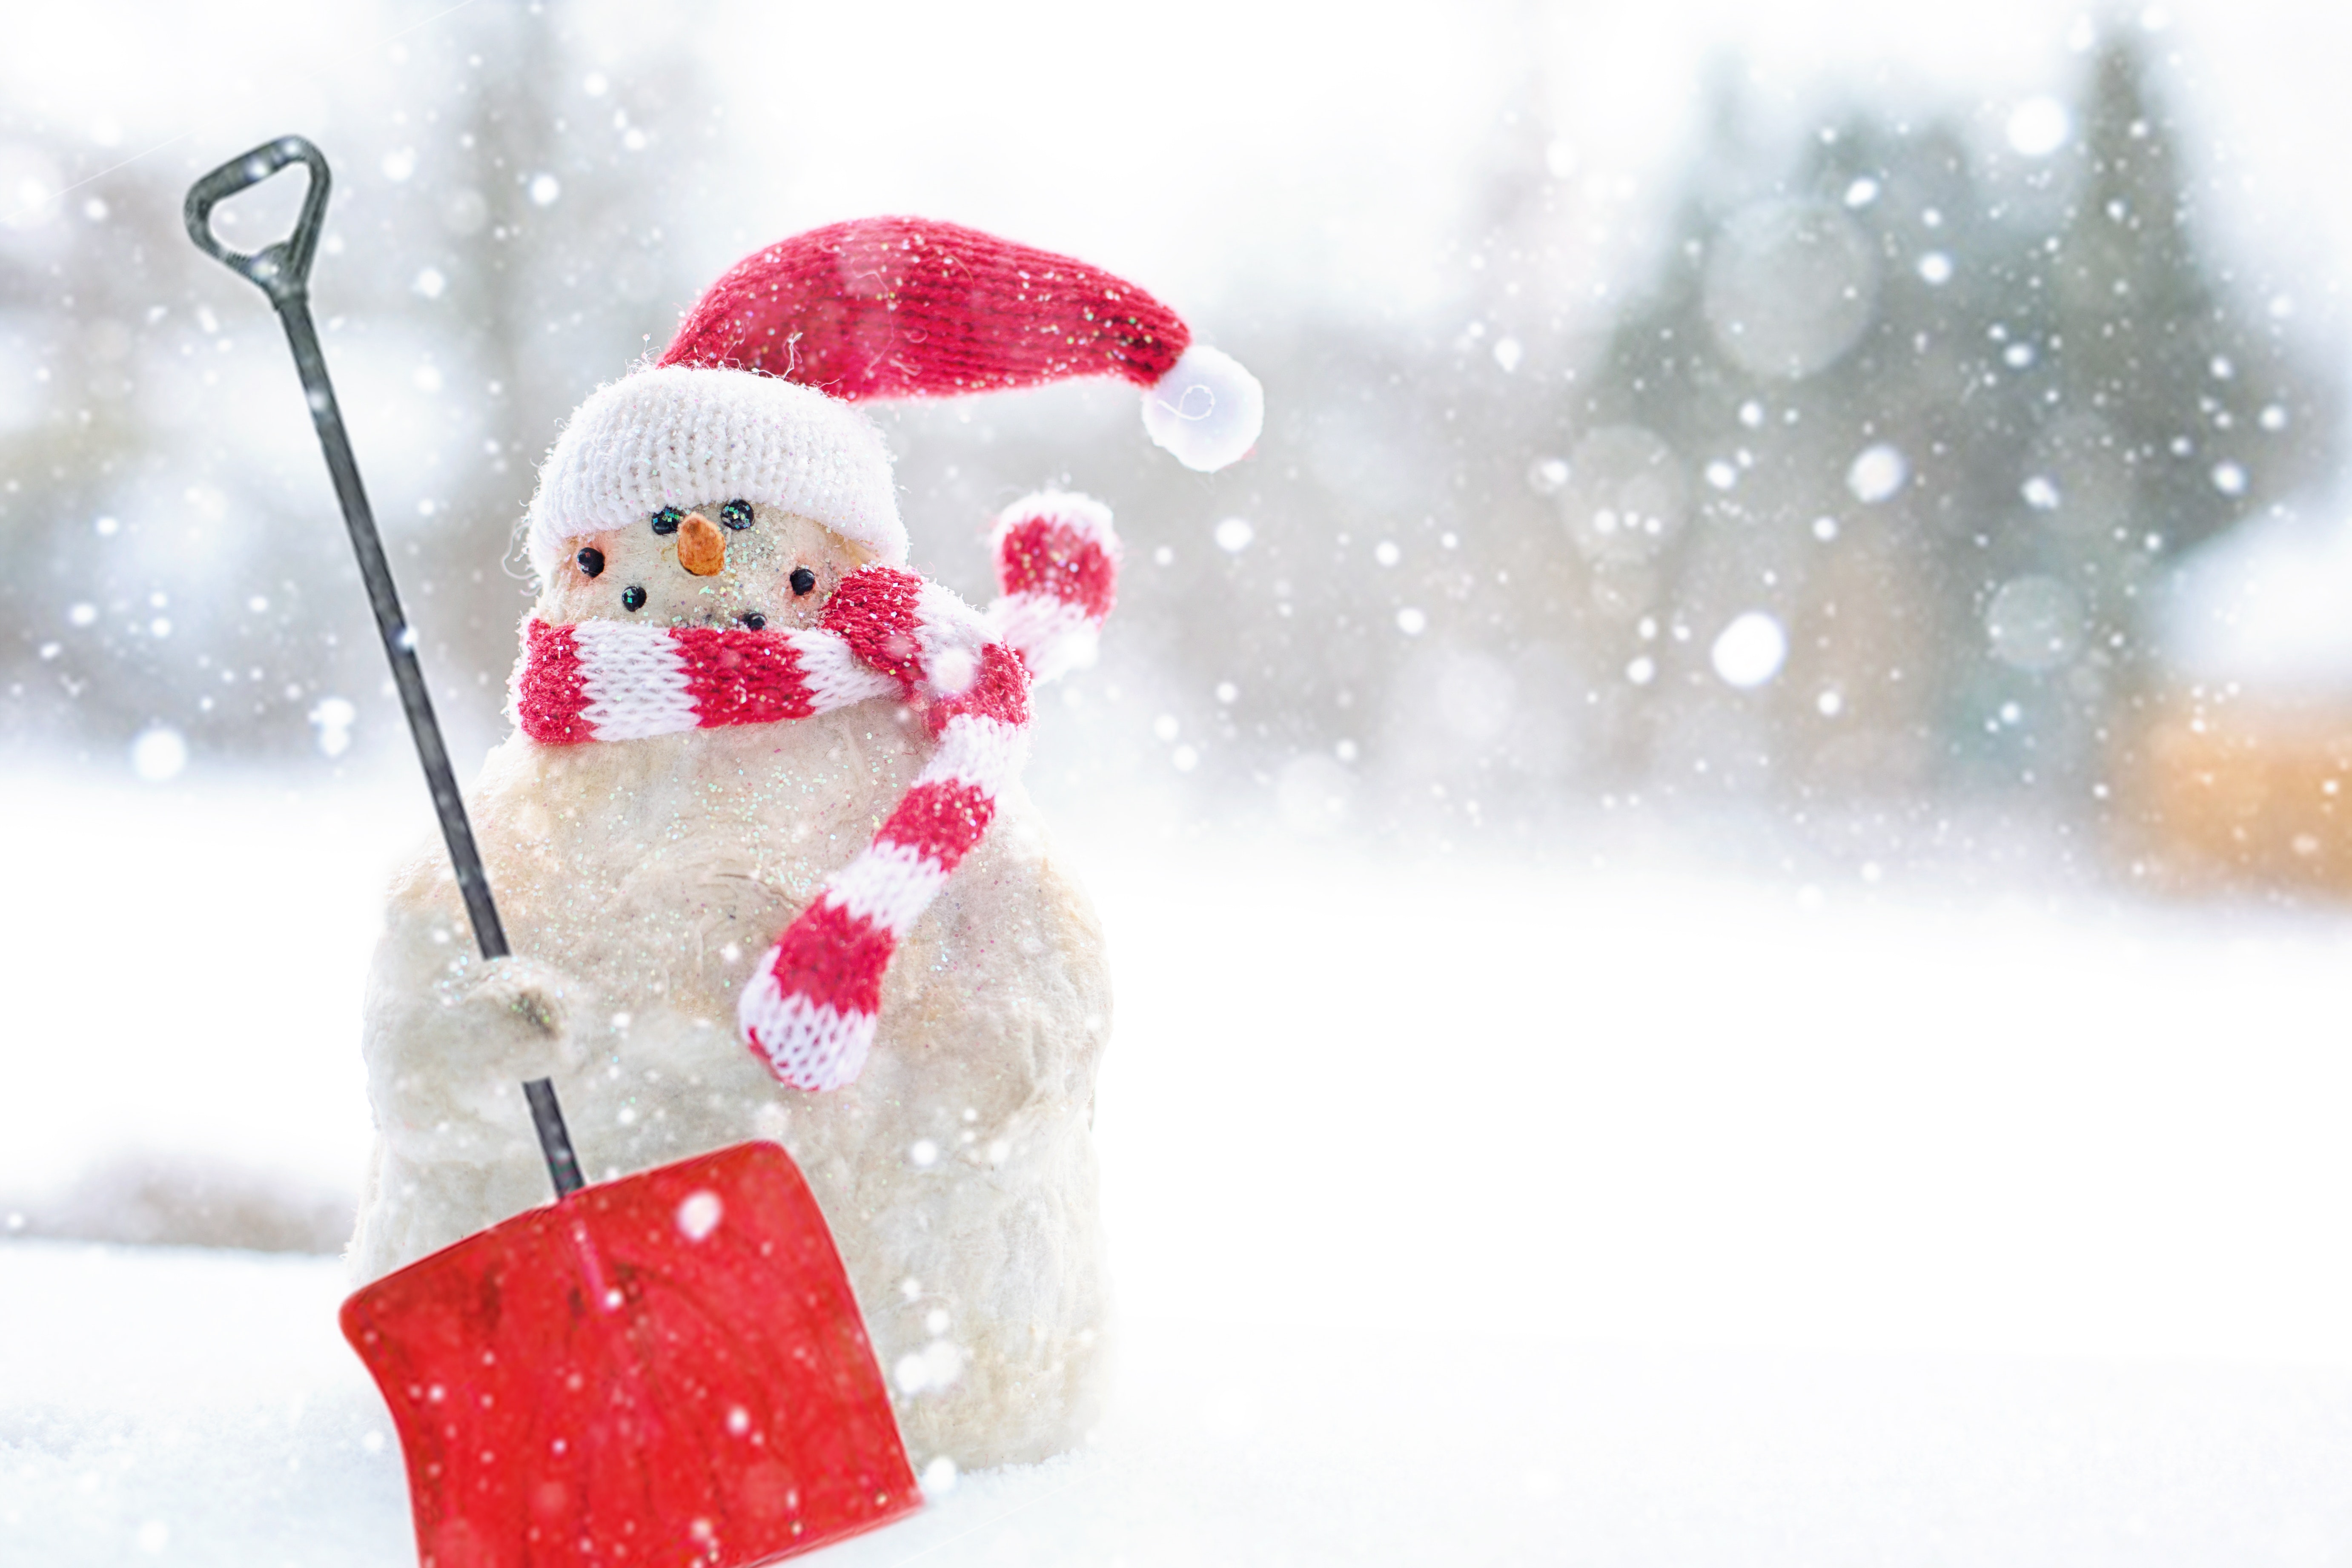 Snowman holding wearing a santa hat holding a red snow shovel